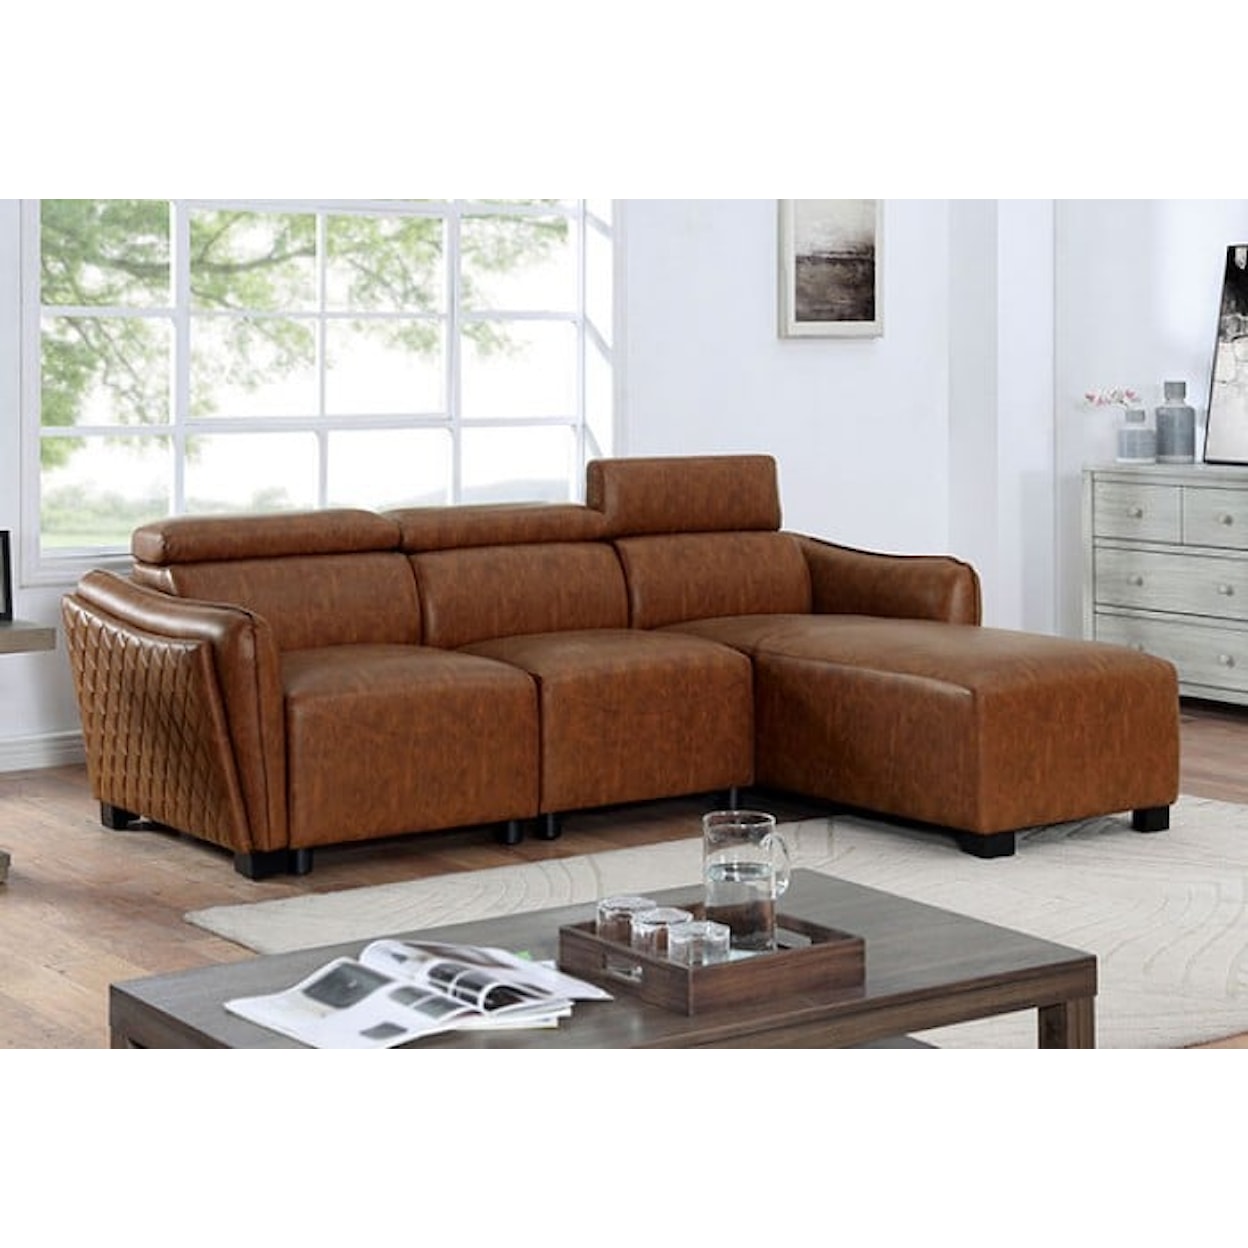 Furniture of America HOLMESTRAND Brown 3-Piece Sectional Sofa